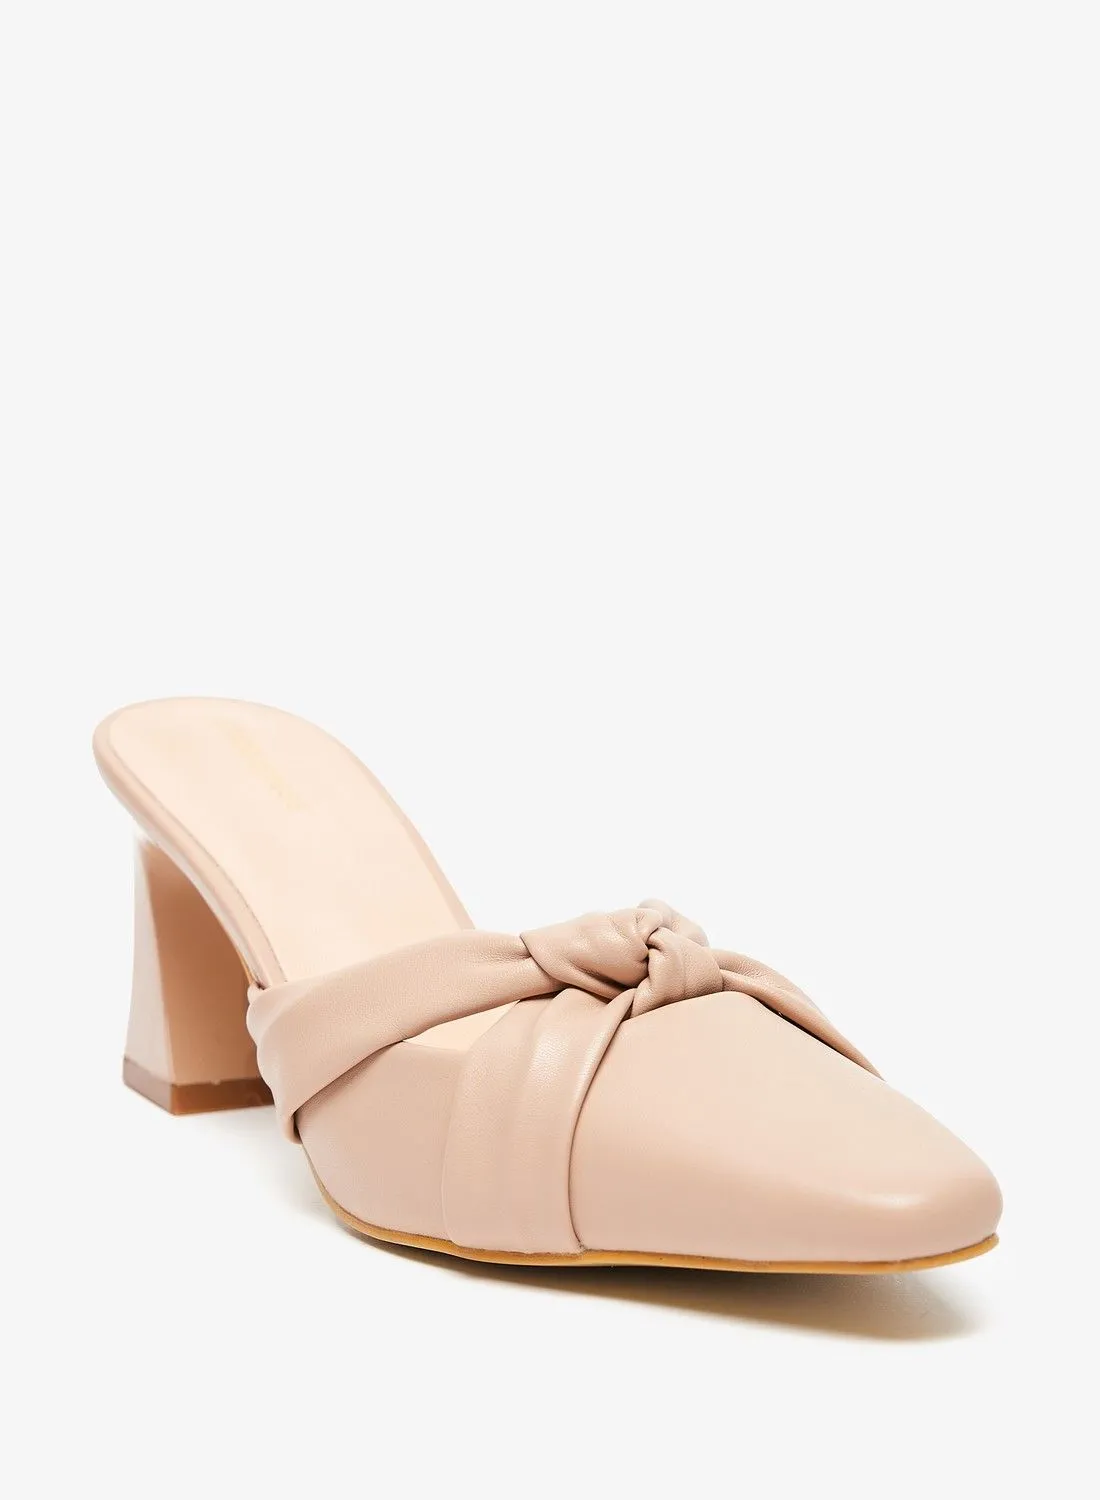 shoexpress Knot Detail Square Toe Slip On Shoes with Block Heels Beige